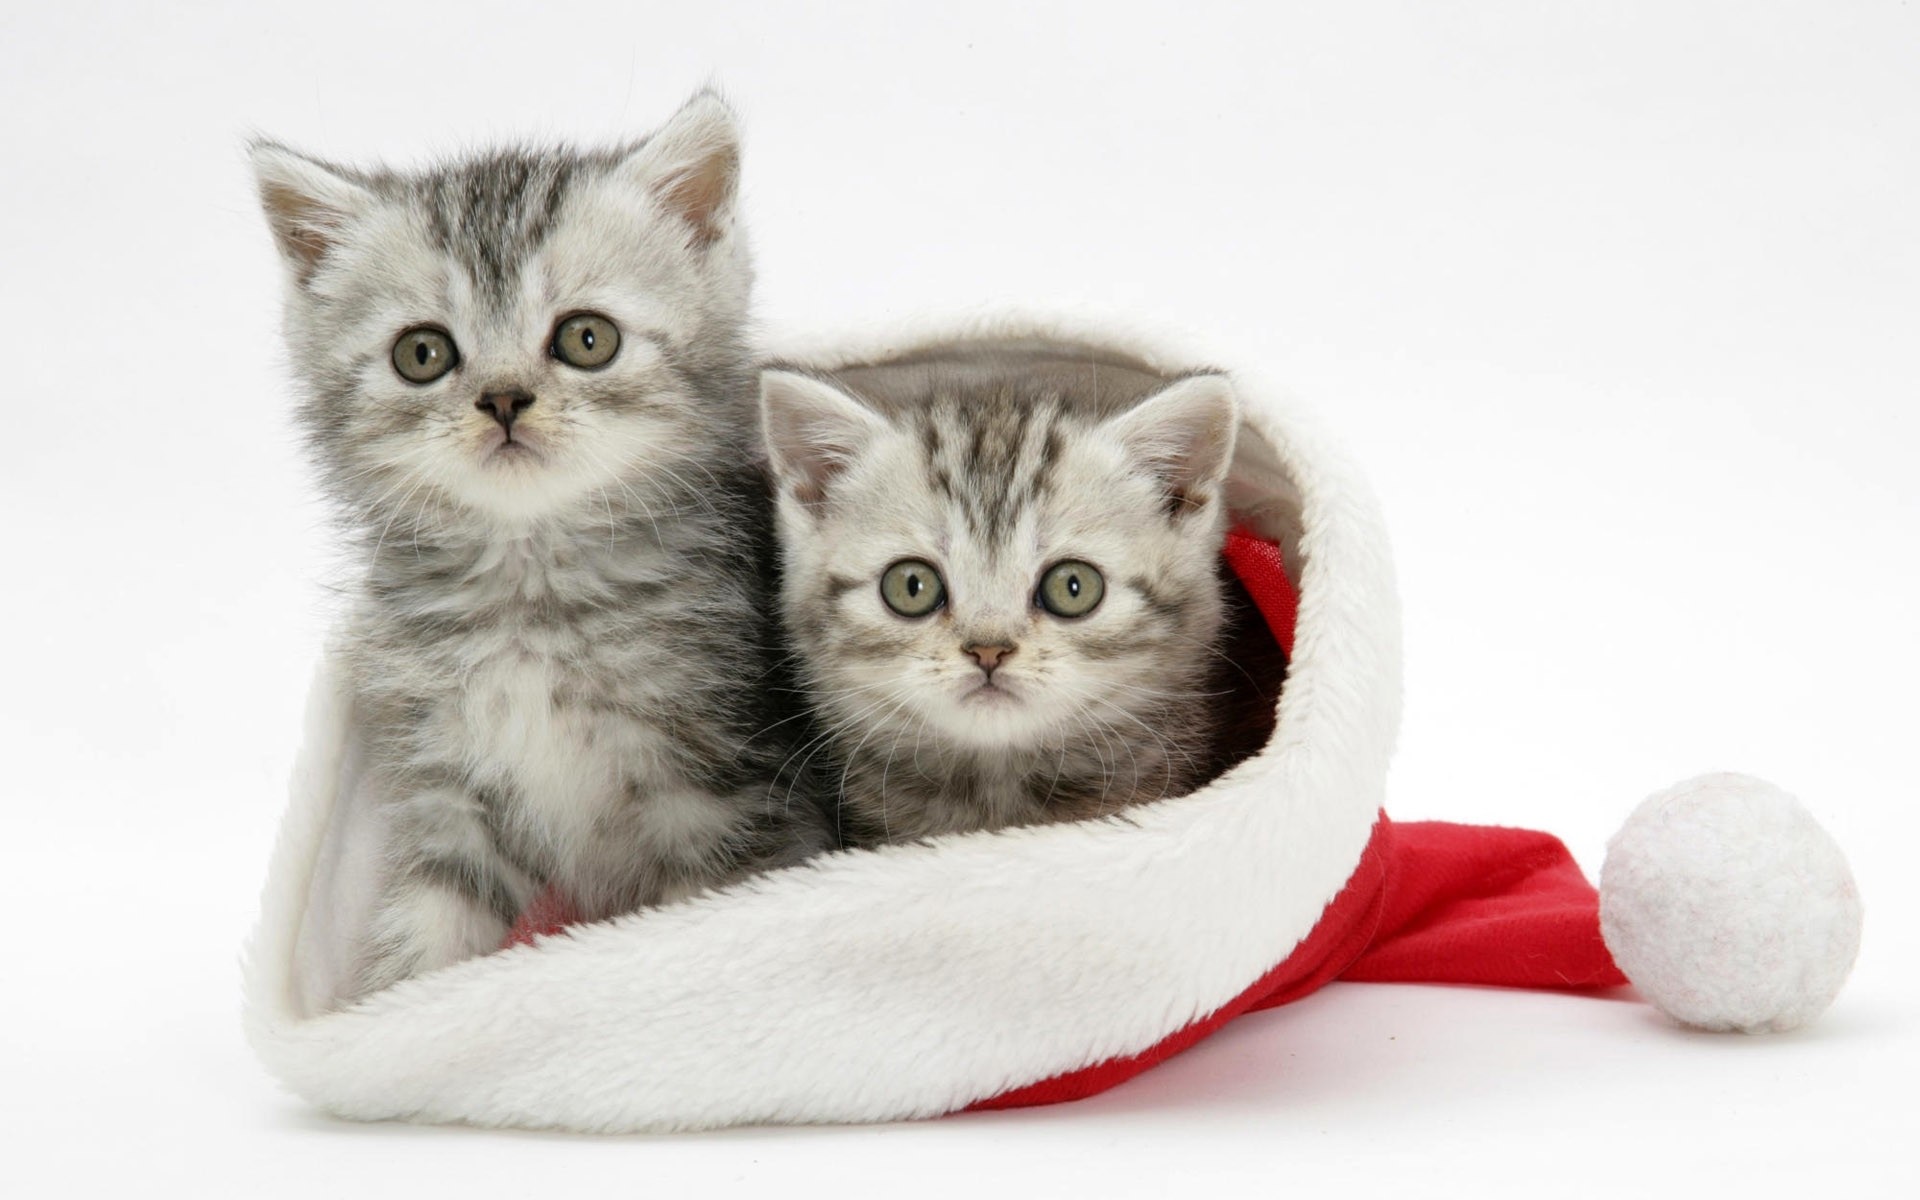 Wallpaper For Cats With White Cats Christmas Wallpaper - Cat Images Hd Download - HD Wallpaper 